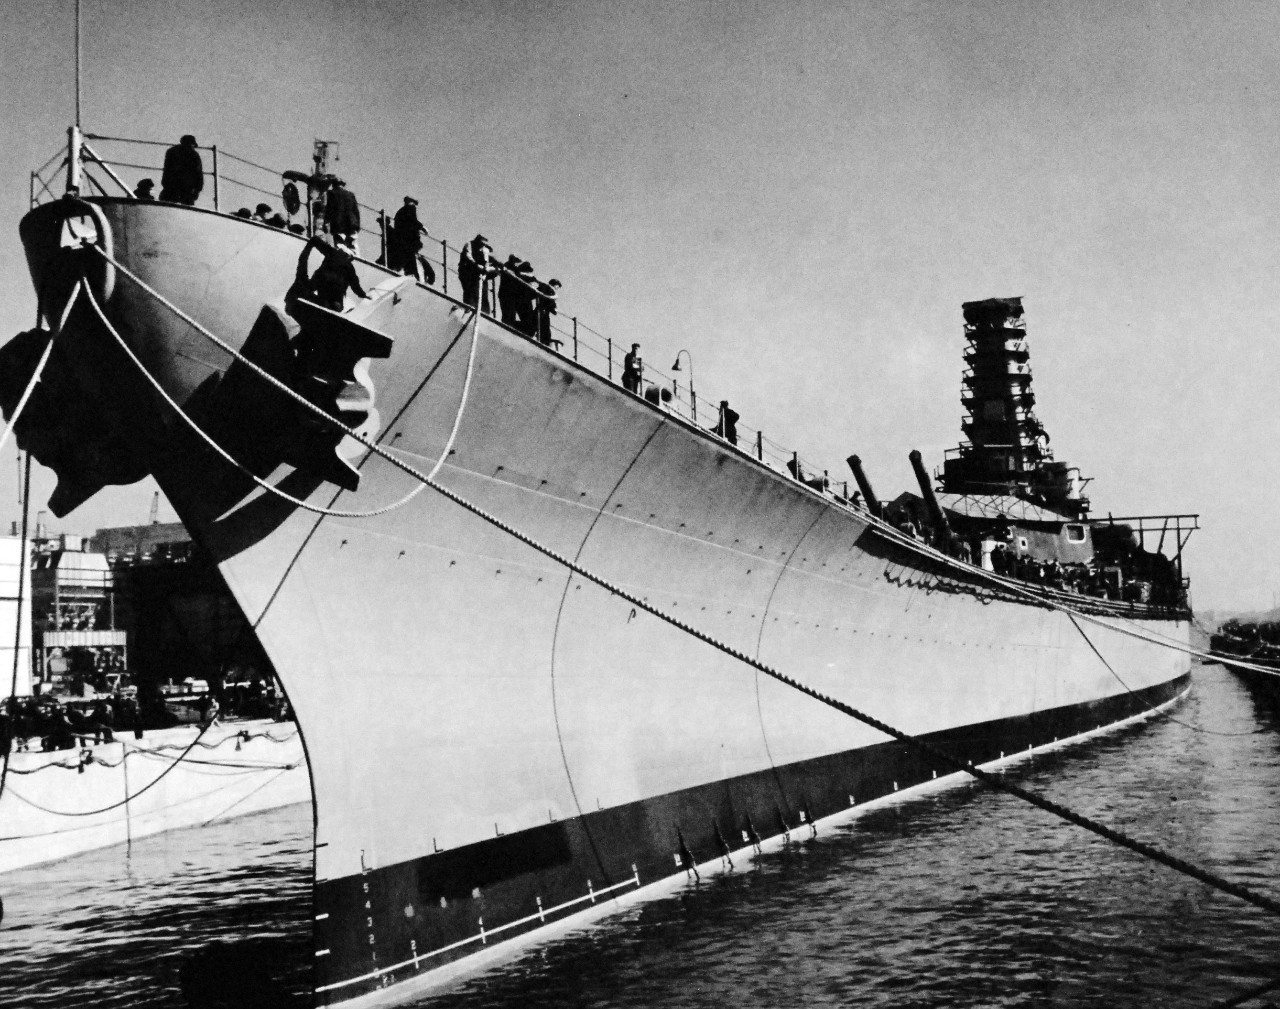 80-G-13555:   USS Iowa (BB 61), 1942.   USS Iowa leaves the New York Navy Yard for completion at the specially built Naval Supply Base, Bayonne, New Jersey, October 20, 1942.  The hull is secured in drydock.  Photograph released by Public Relations, Third Naval District.    Official U.S. Navy Photograph, now in the collections of the National Archives.  (2016/08/09)